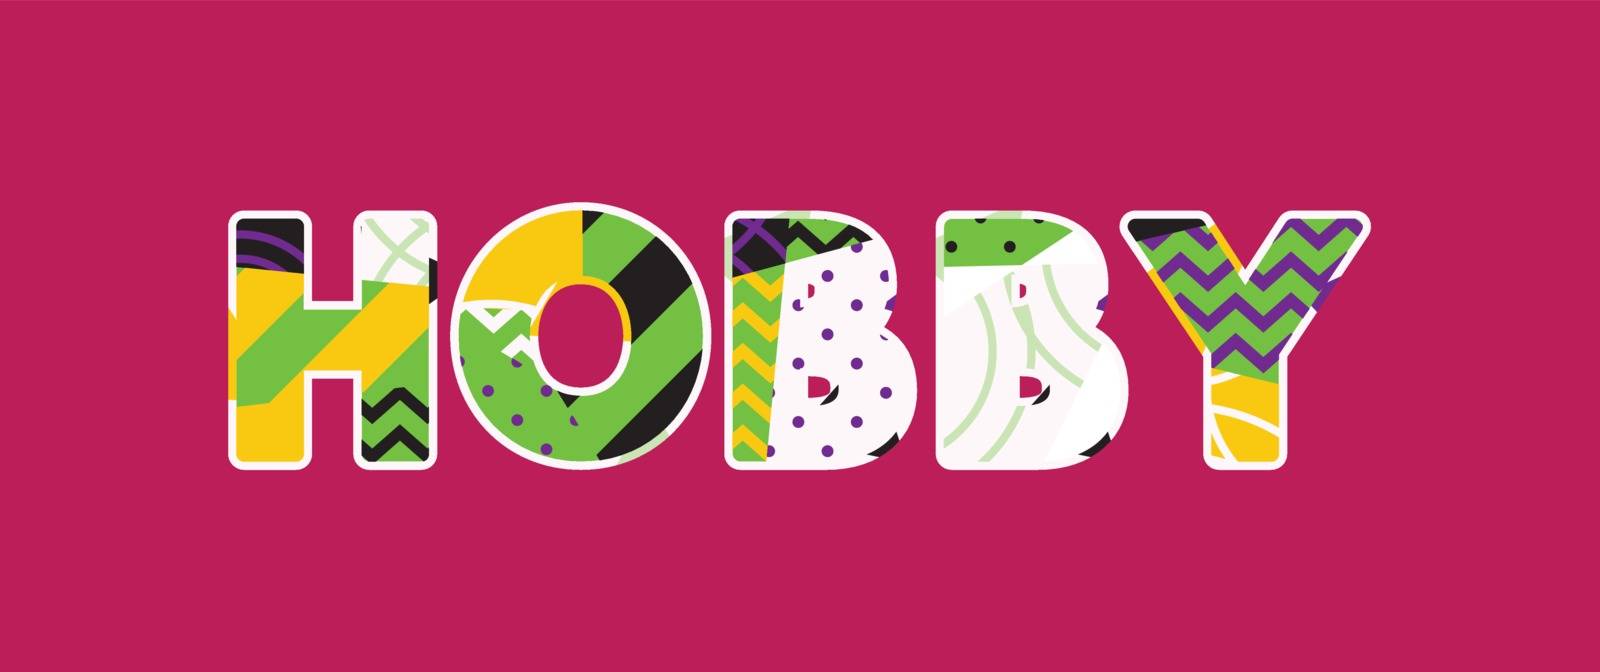 The word HOBBY concept written in colorful abstract typography. Vector EPS 10 available.